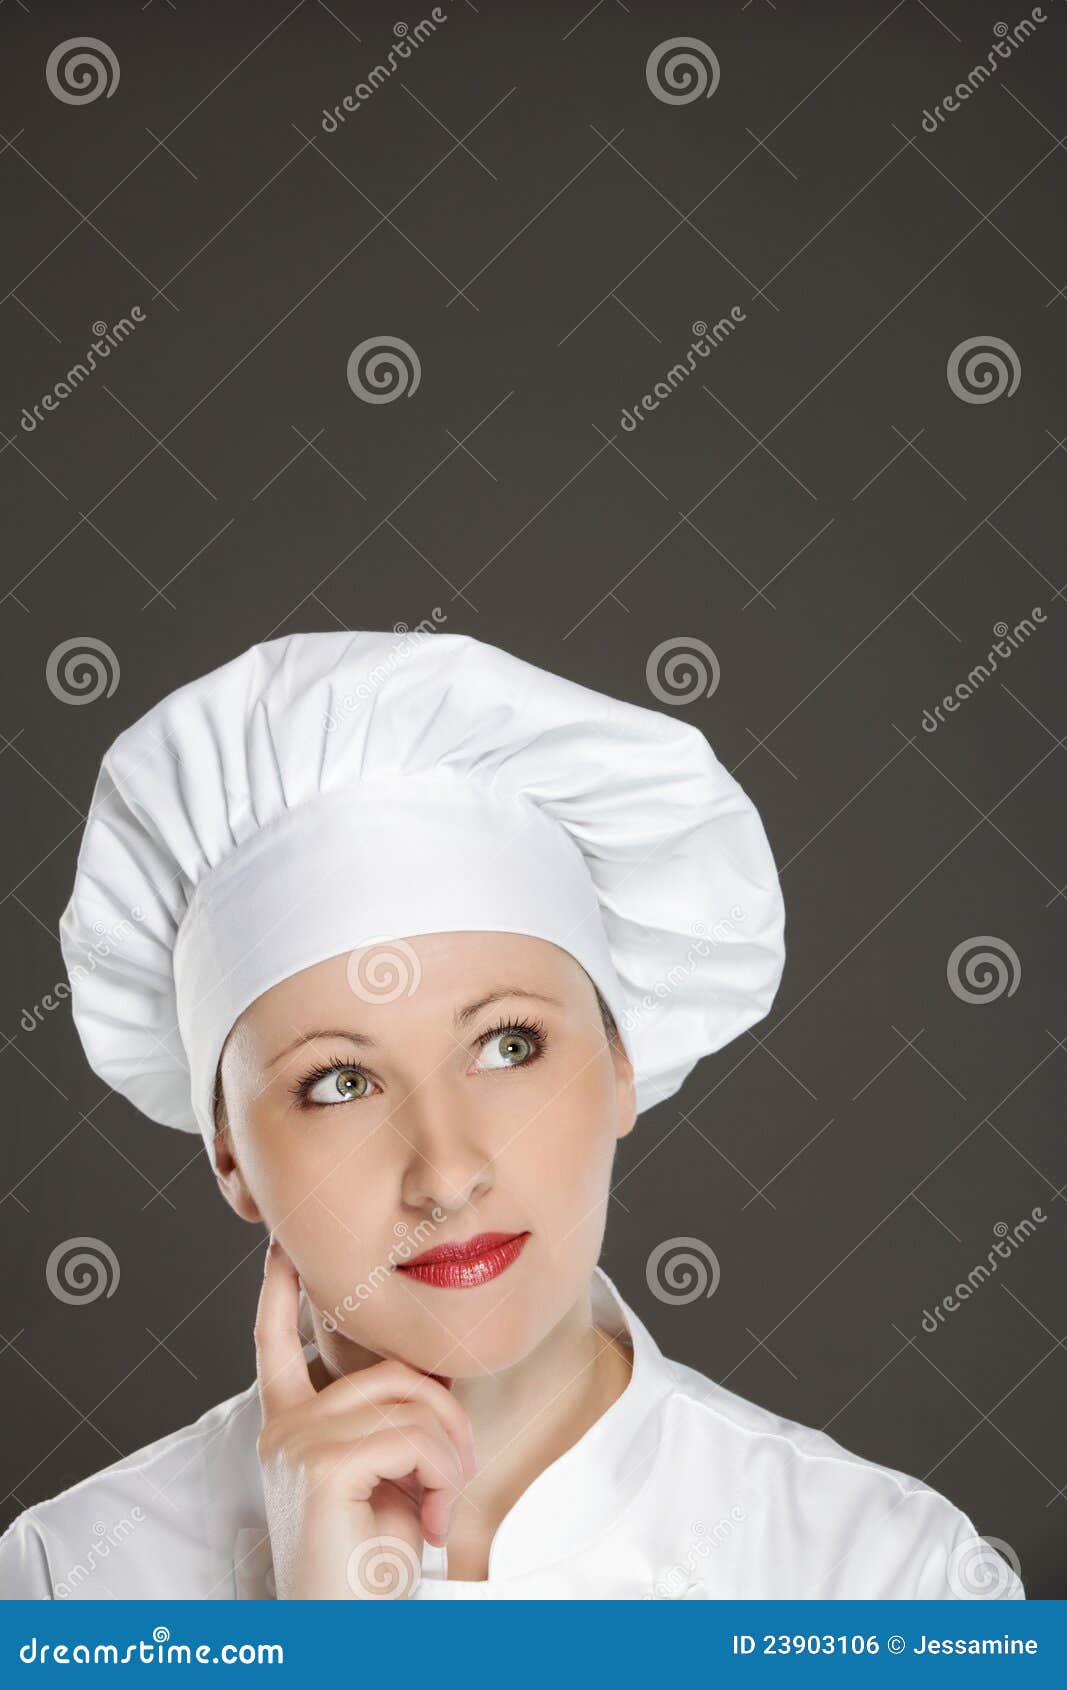 Chef woman having an idea stock photo. Image of blue - 23903106